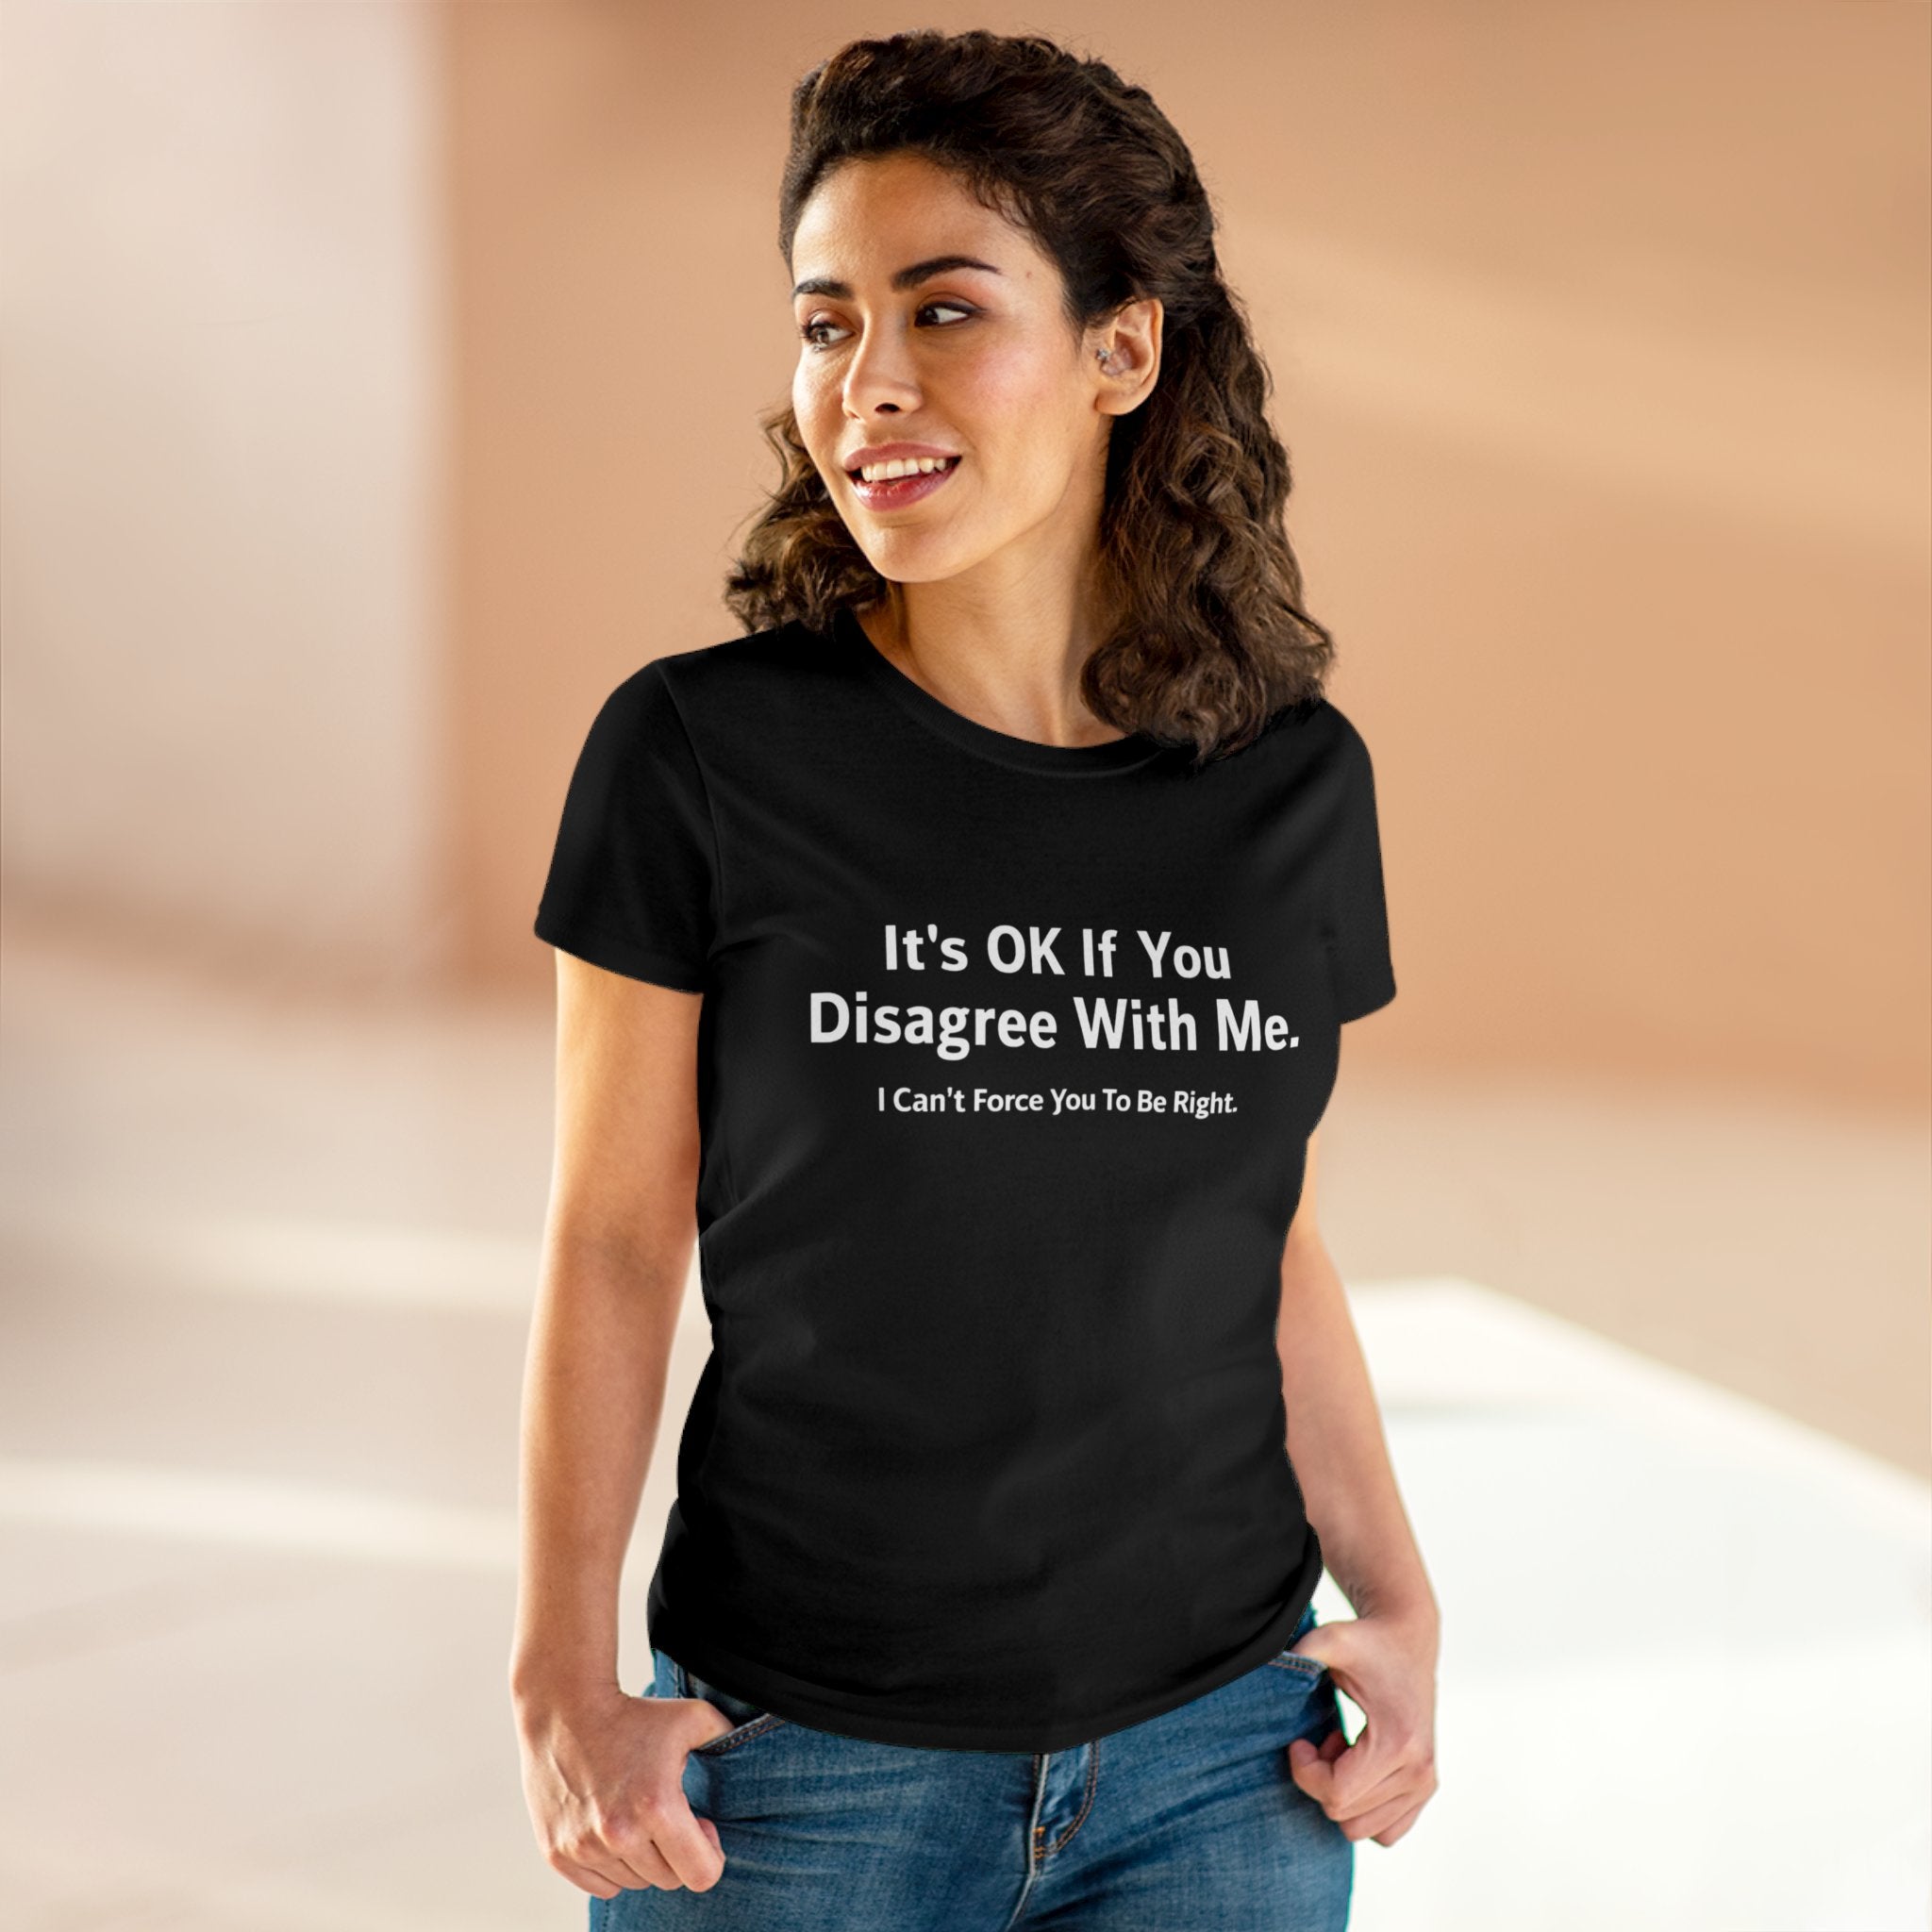 A woman wearing a black t-shirt with the empowering print "It's OK If You Disagree With Me. I Can't Force You To Be Right." is standing and smiling. This pre-shrunk "It's Ok If You Disagree With Me - Women's Tee" epitomizes confidence and wit, perfect for making a bold statement.